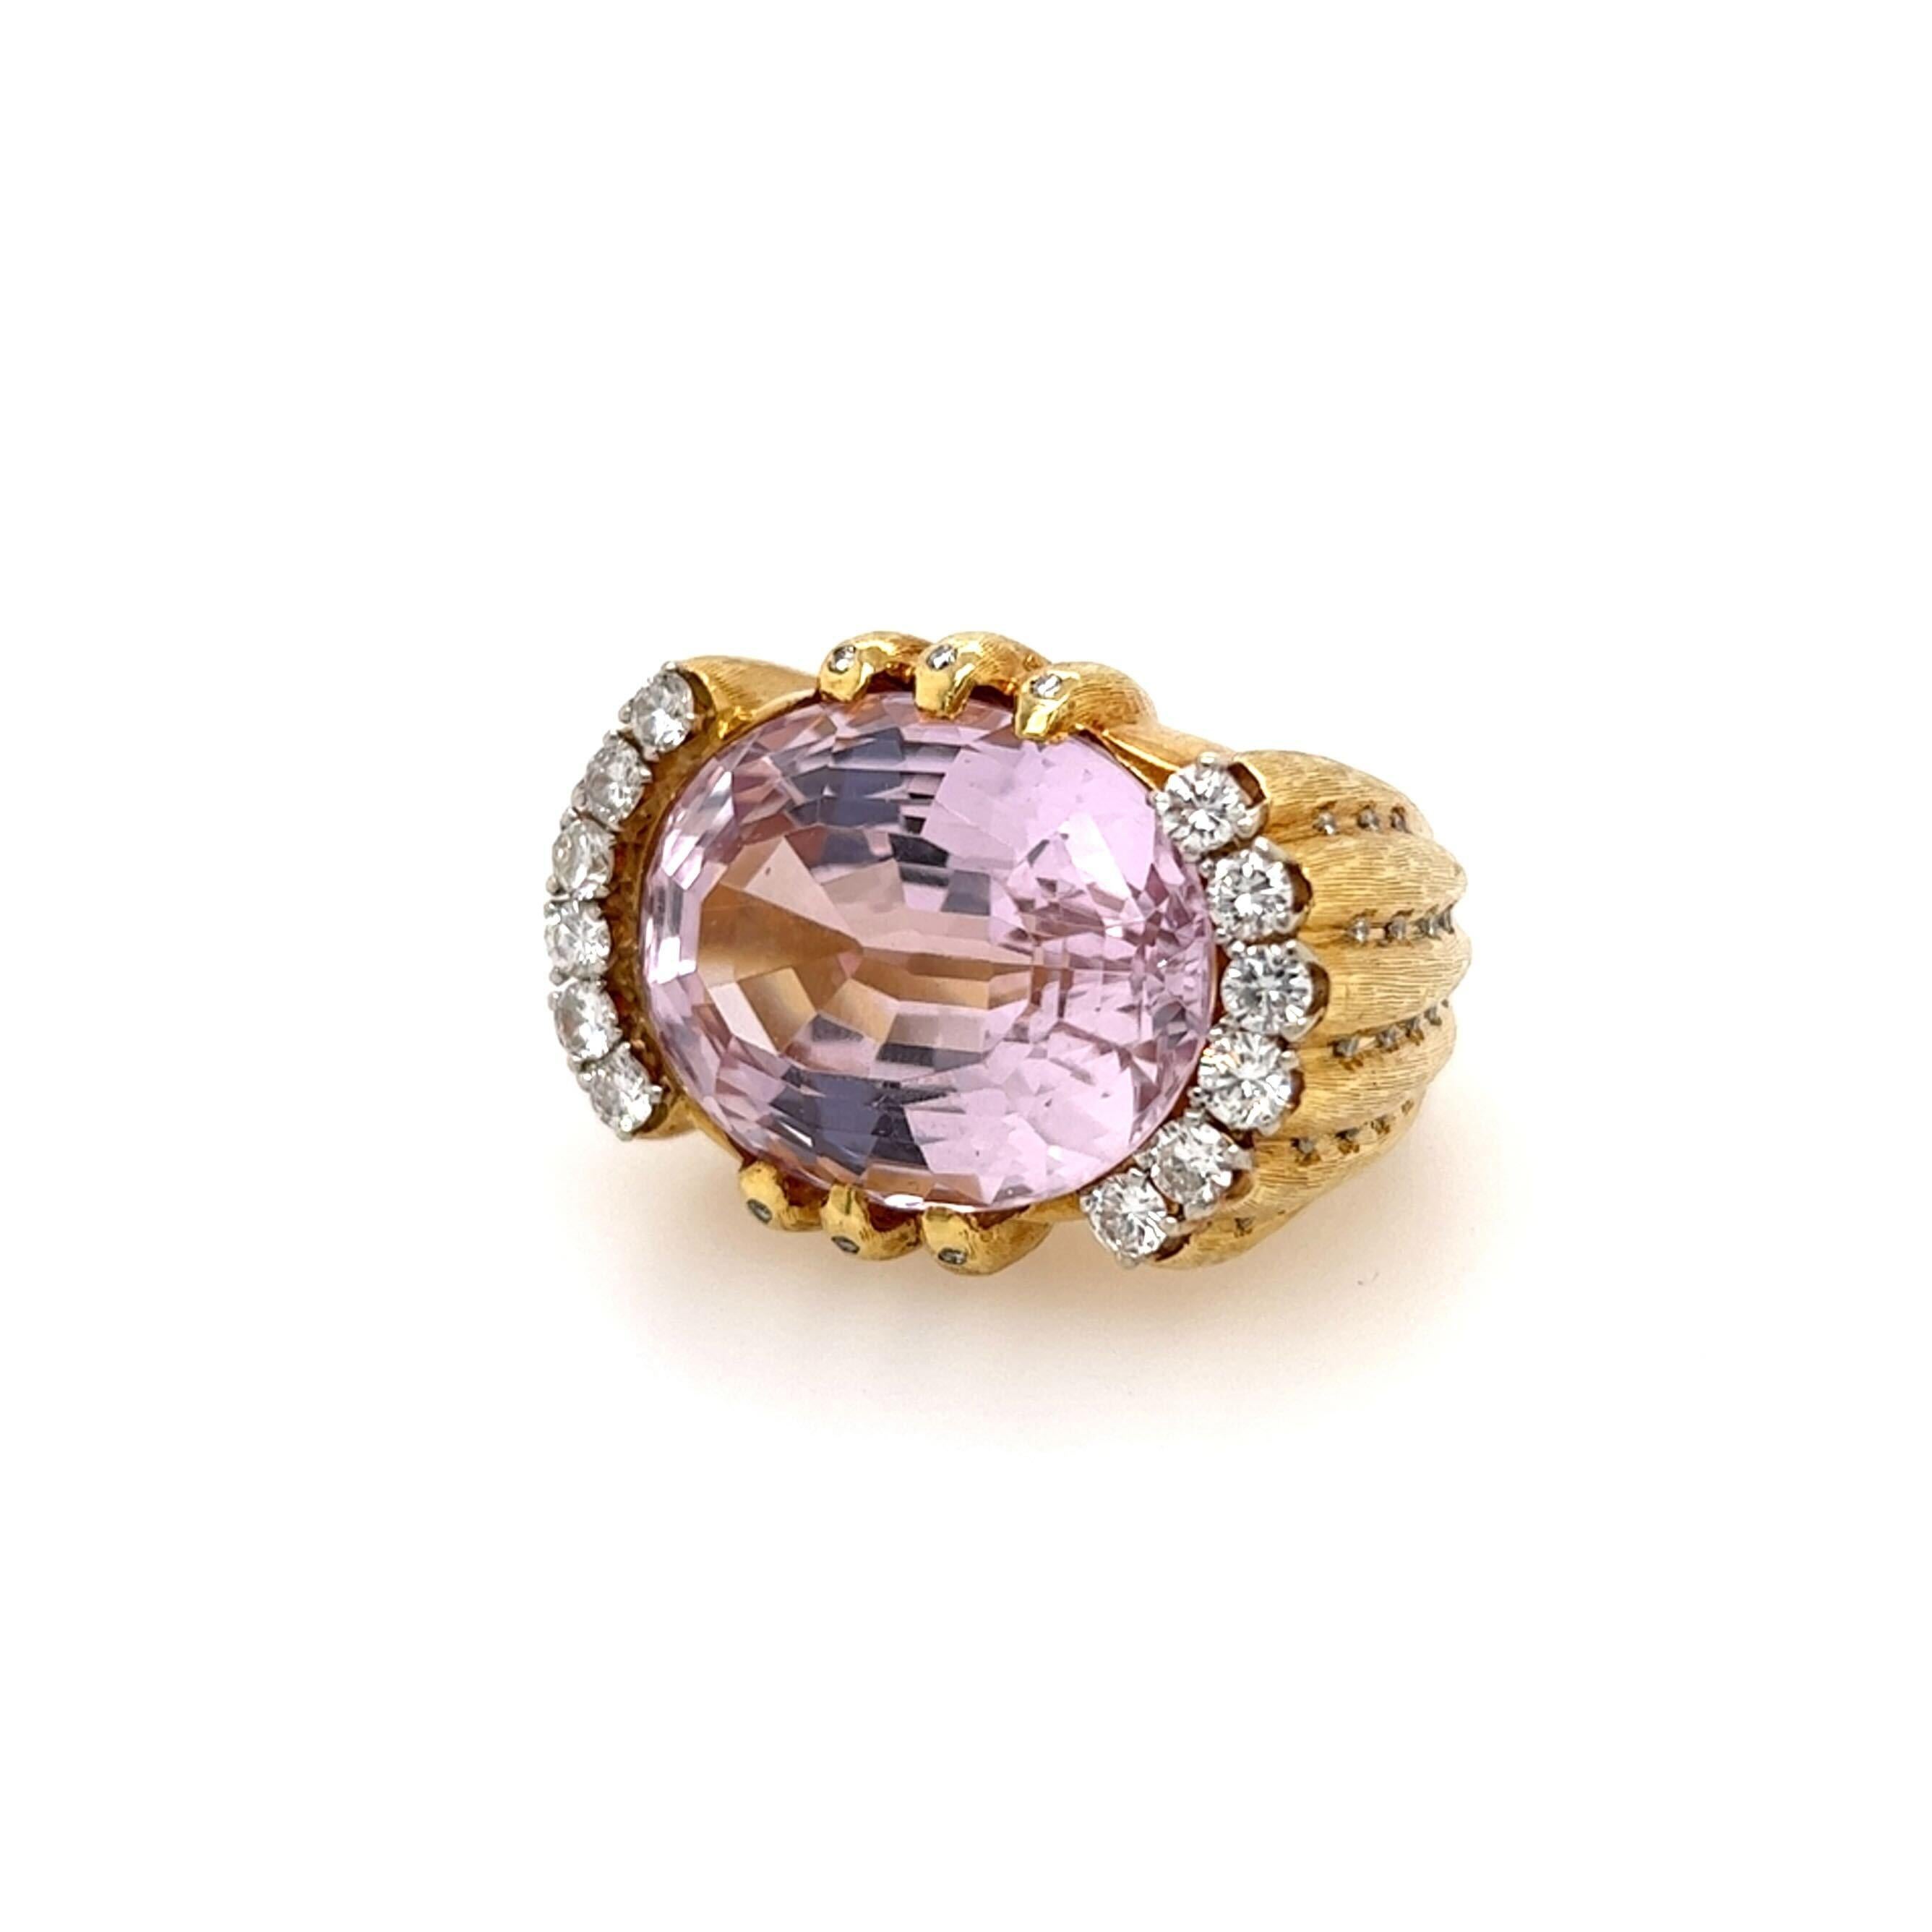 An 18 karat yellow gold, kunzite and diamond ring.  The ring centering a horizontally set mixed cut oval kunzite measuring approximately 23.54 x 17.52 mm. in a raised textured fluted mount, enhanced with twelve (12) brilliant cut diamonds at the